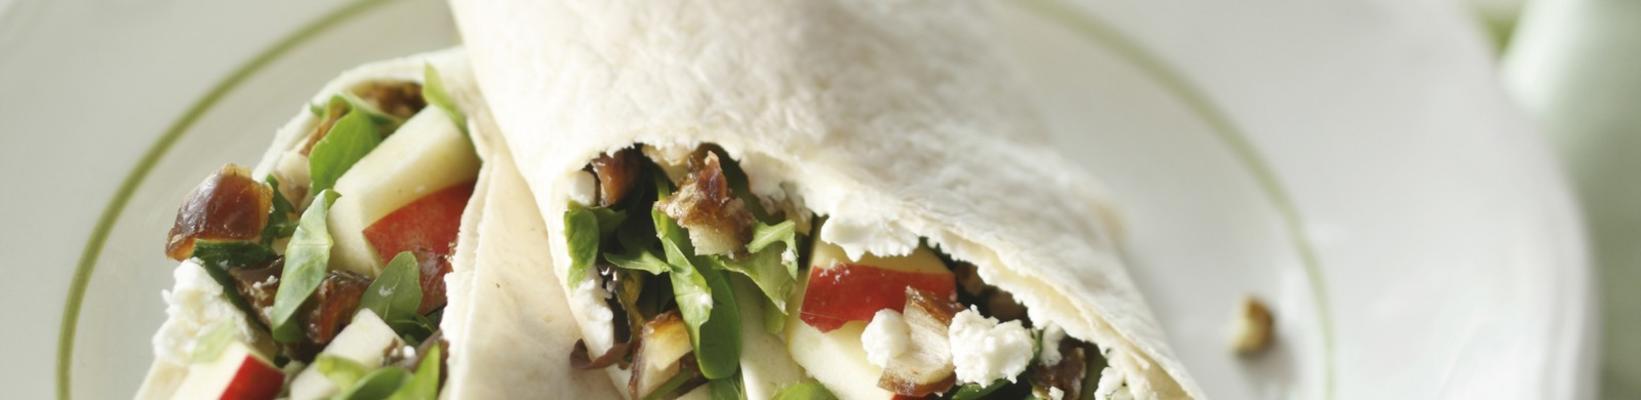 vegawrap with goat cheese and herb salad